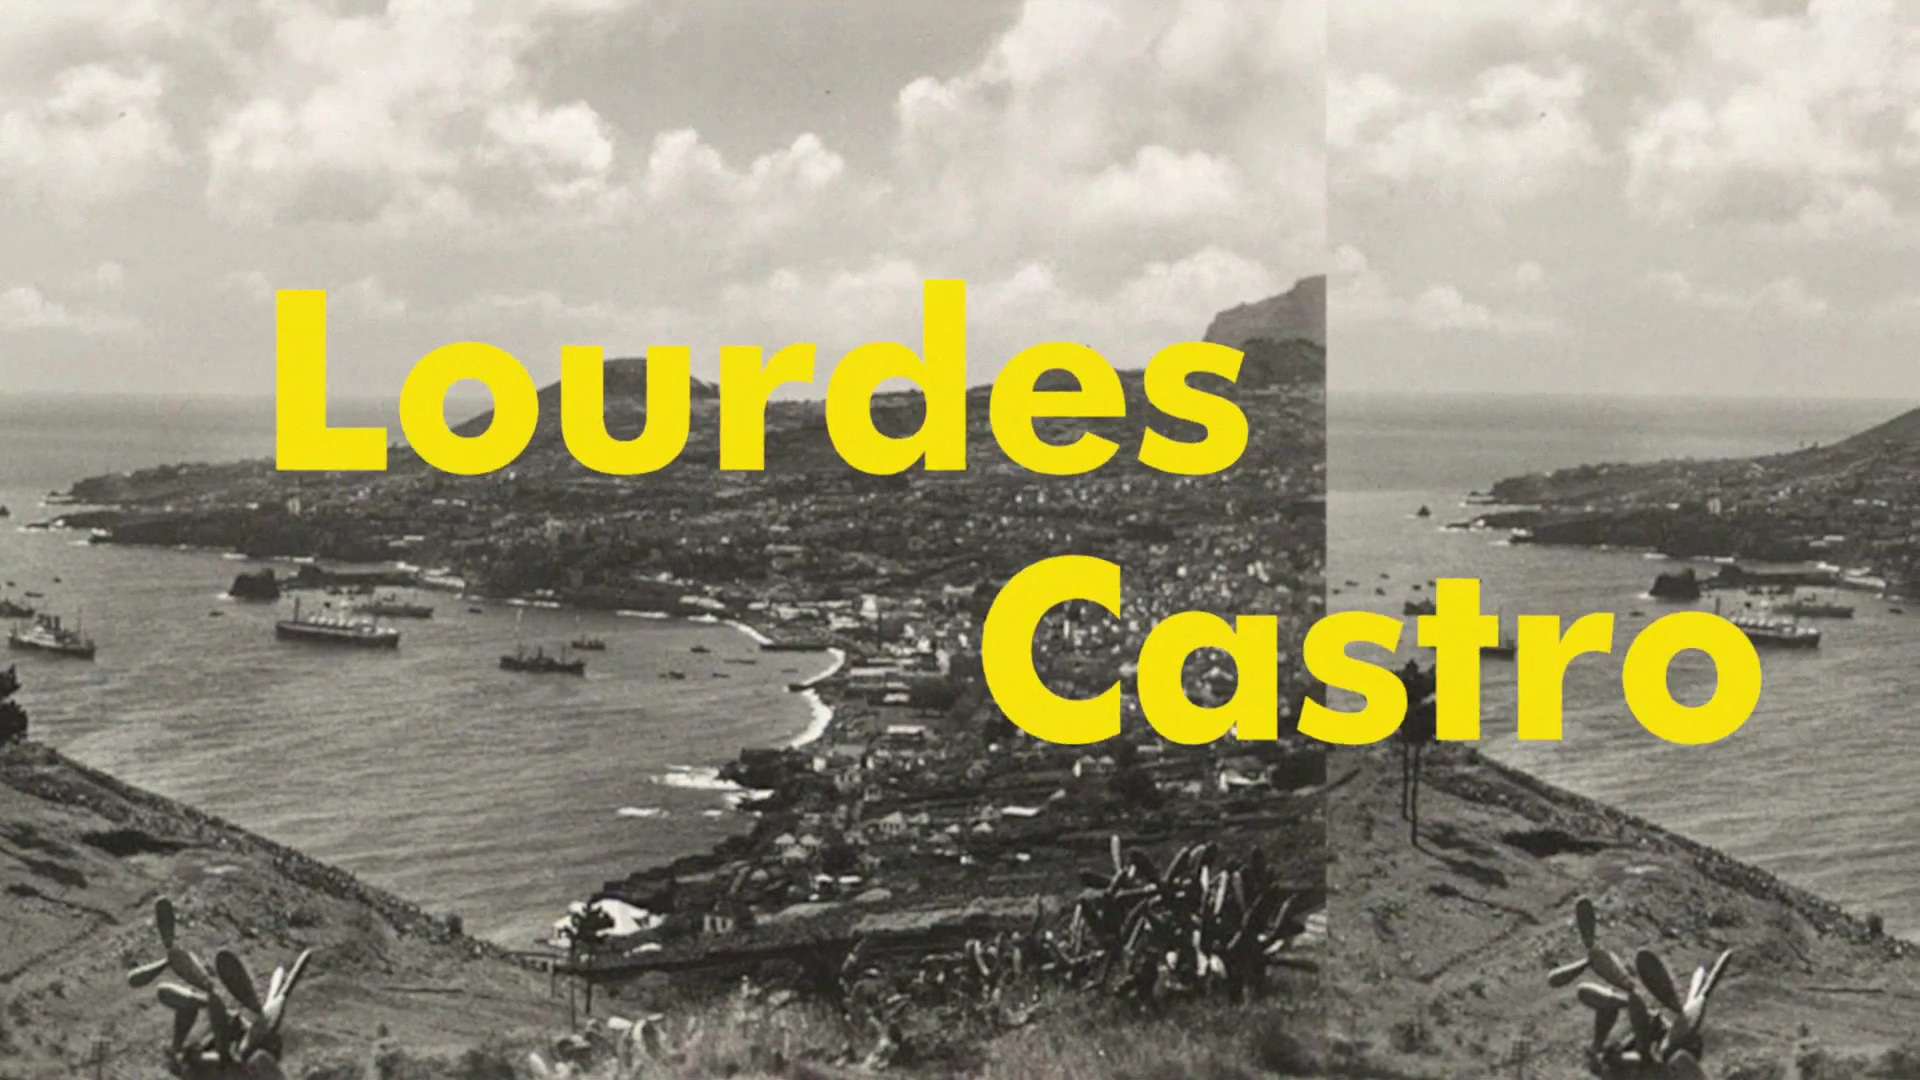 Image taken from the Lourdes Castro video with a photograph of the Madeira Island and name "Lourdes Castro" written in the center.